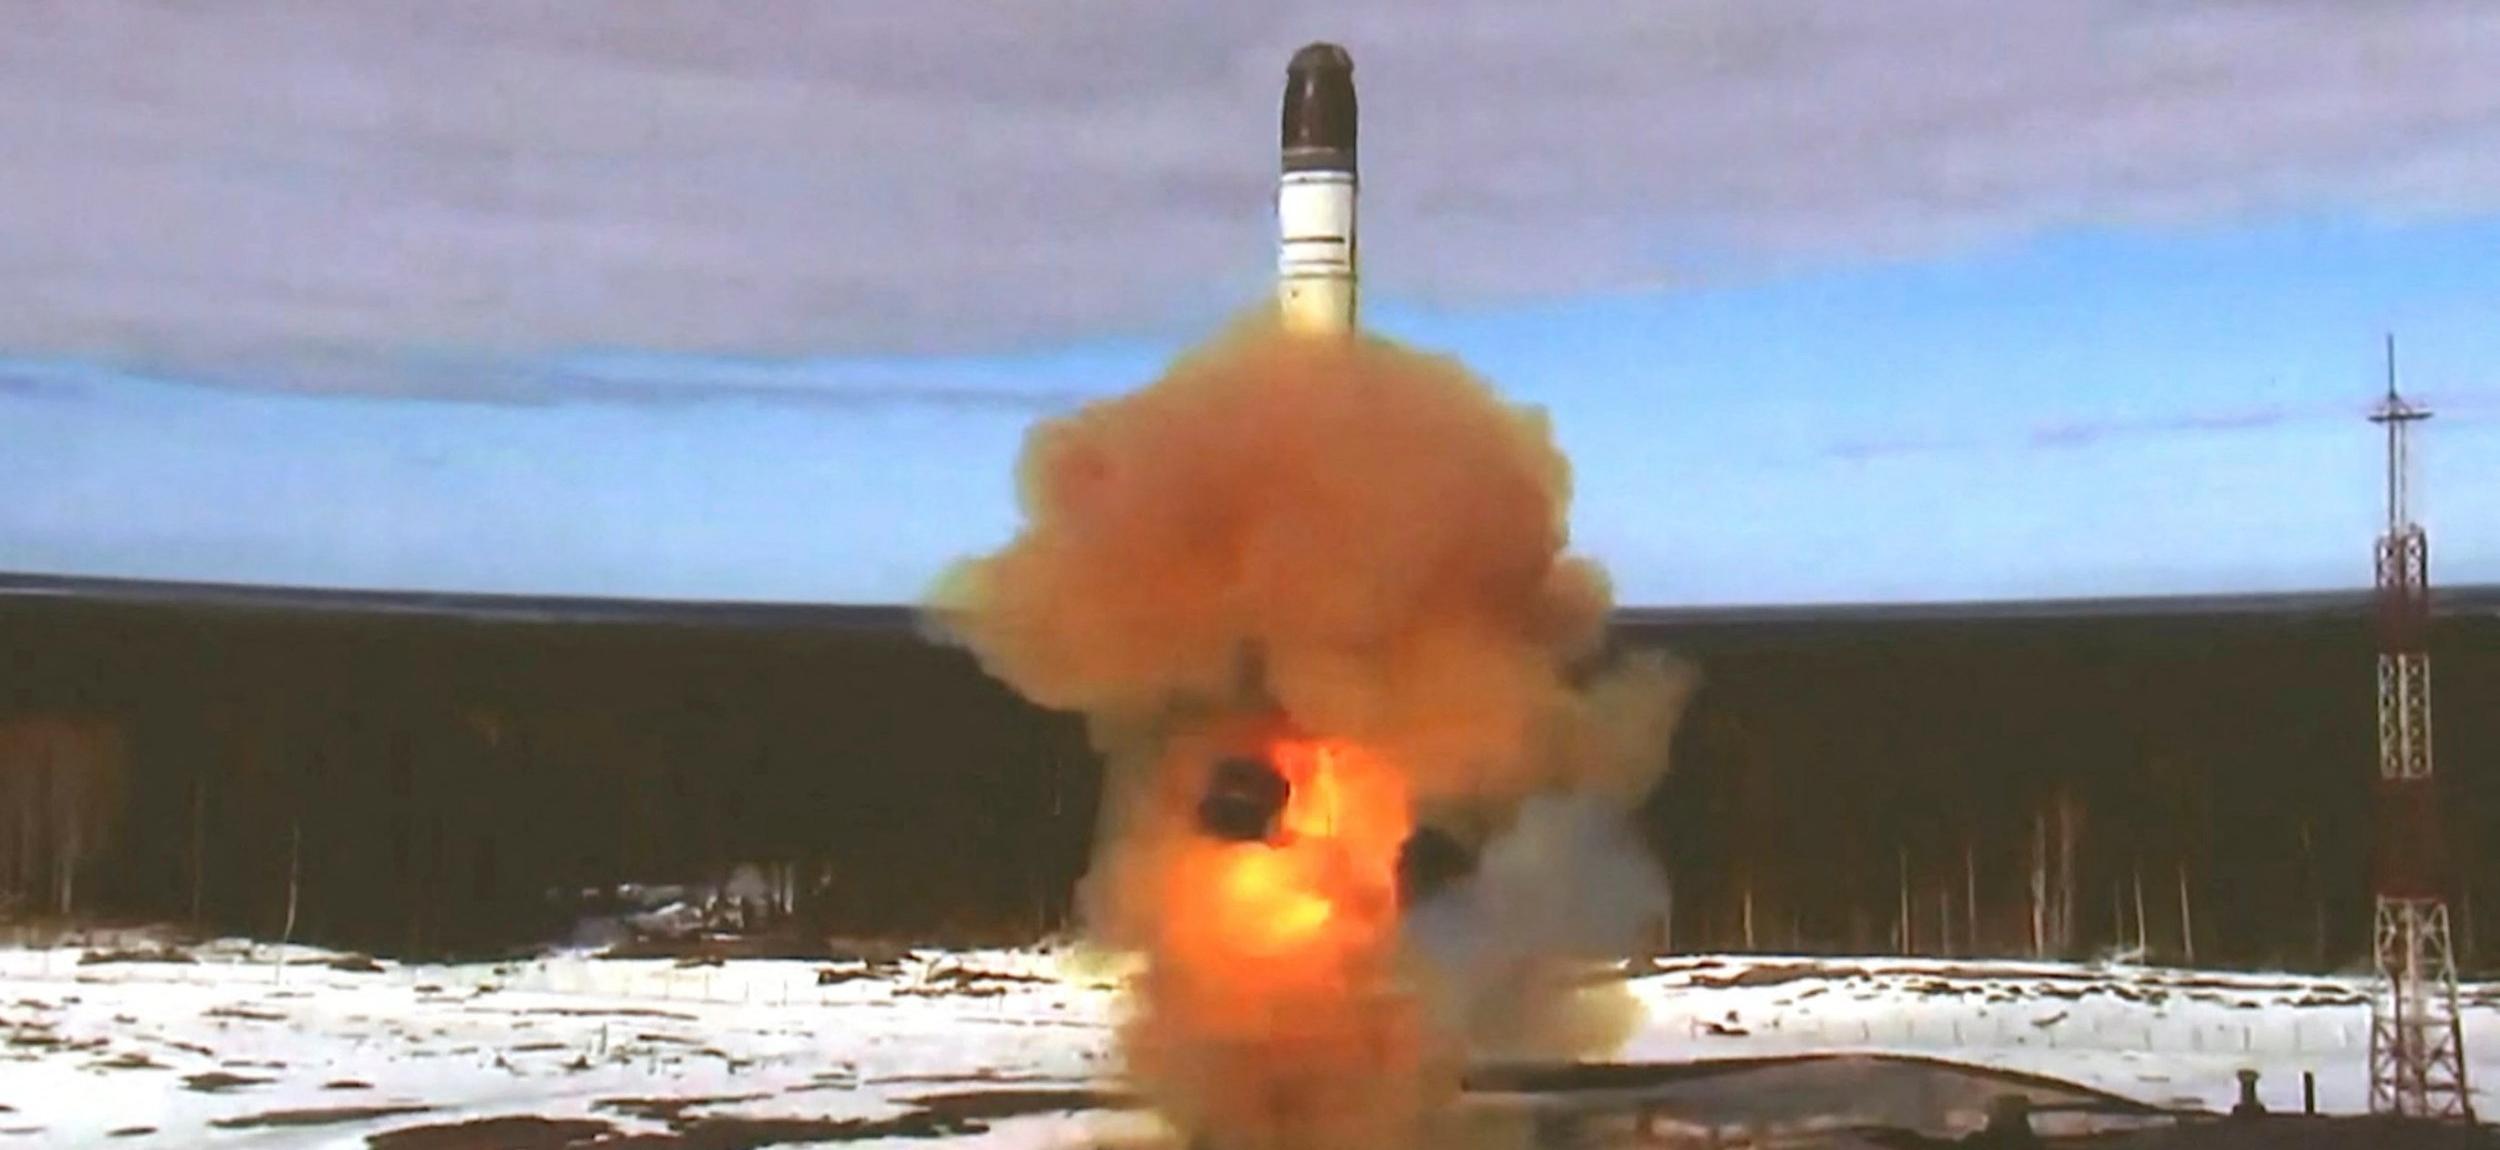 Russia test-fired the "RS-28 SARMAT," world's "most powerful" nuclear-capable intercontinental ballistic missile_30.1